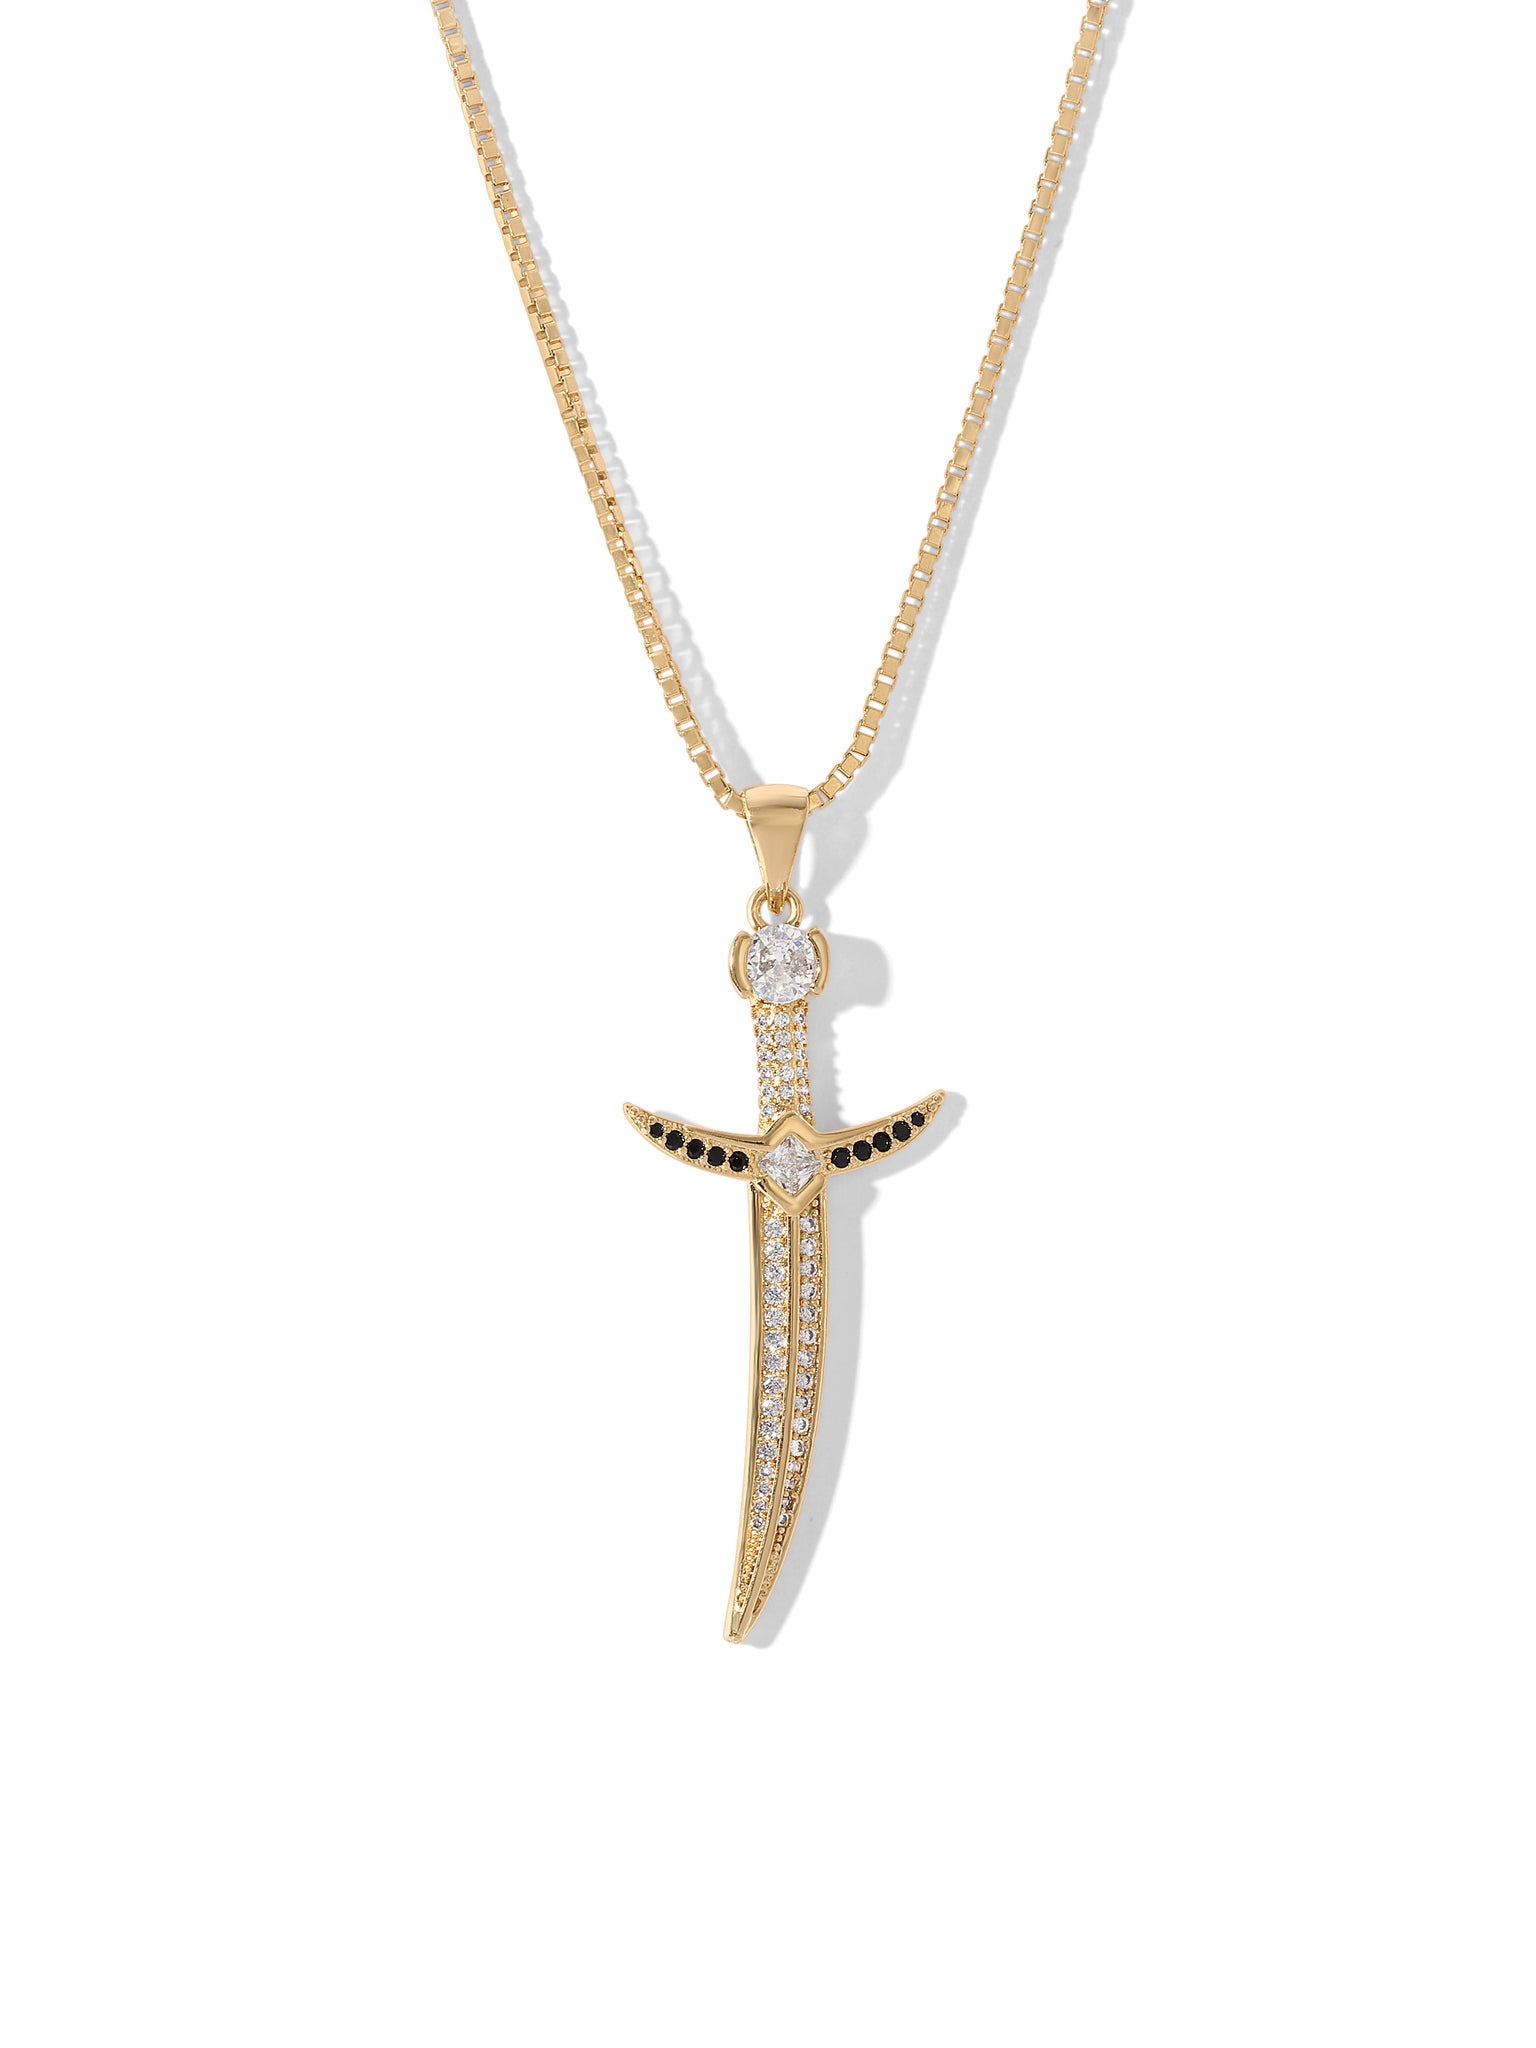 Amazon.com: Large Gold Dagger Pendant Gold Fill Necklace : Handmade Products